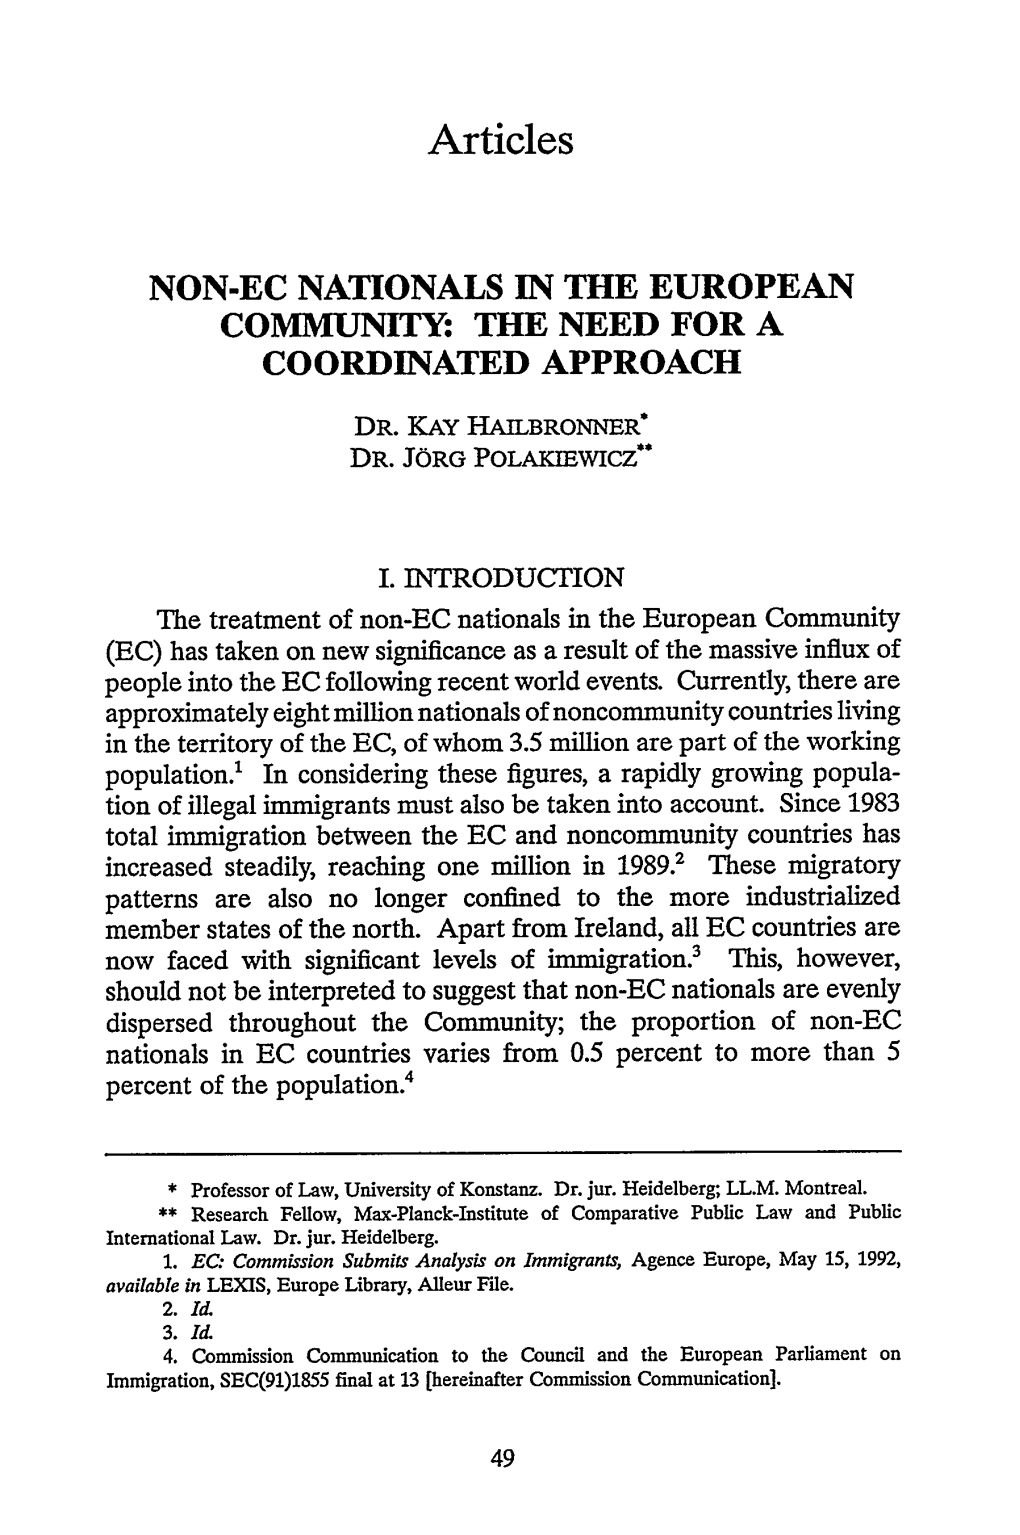 Non-Ec Nationals in the European Community: the Need for a Coordinated Approach